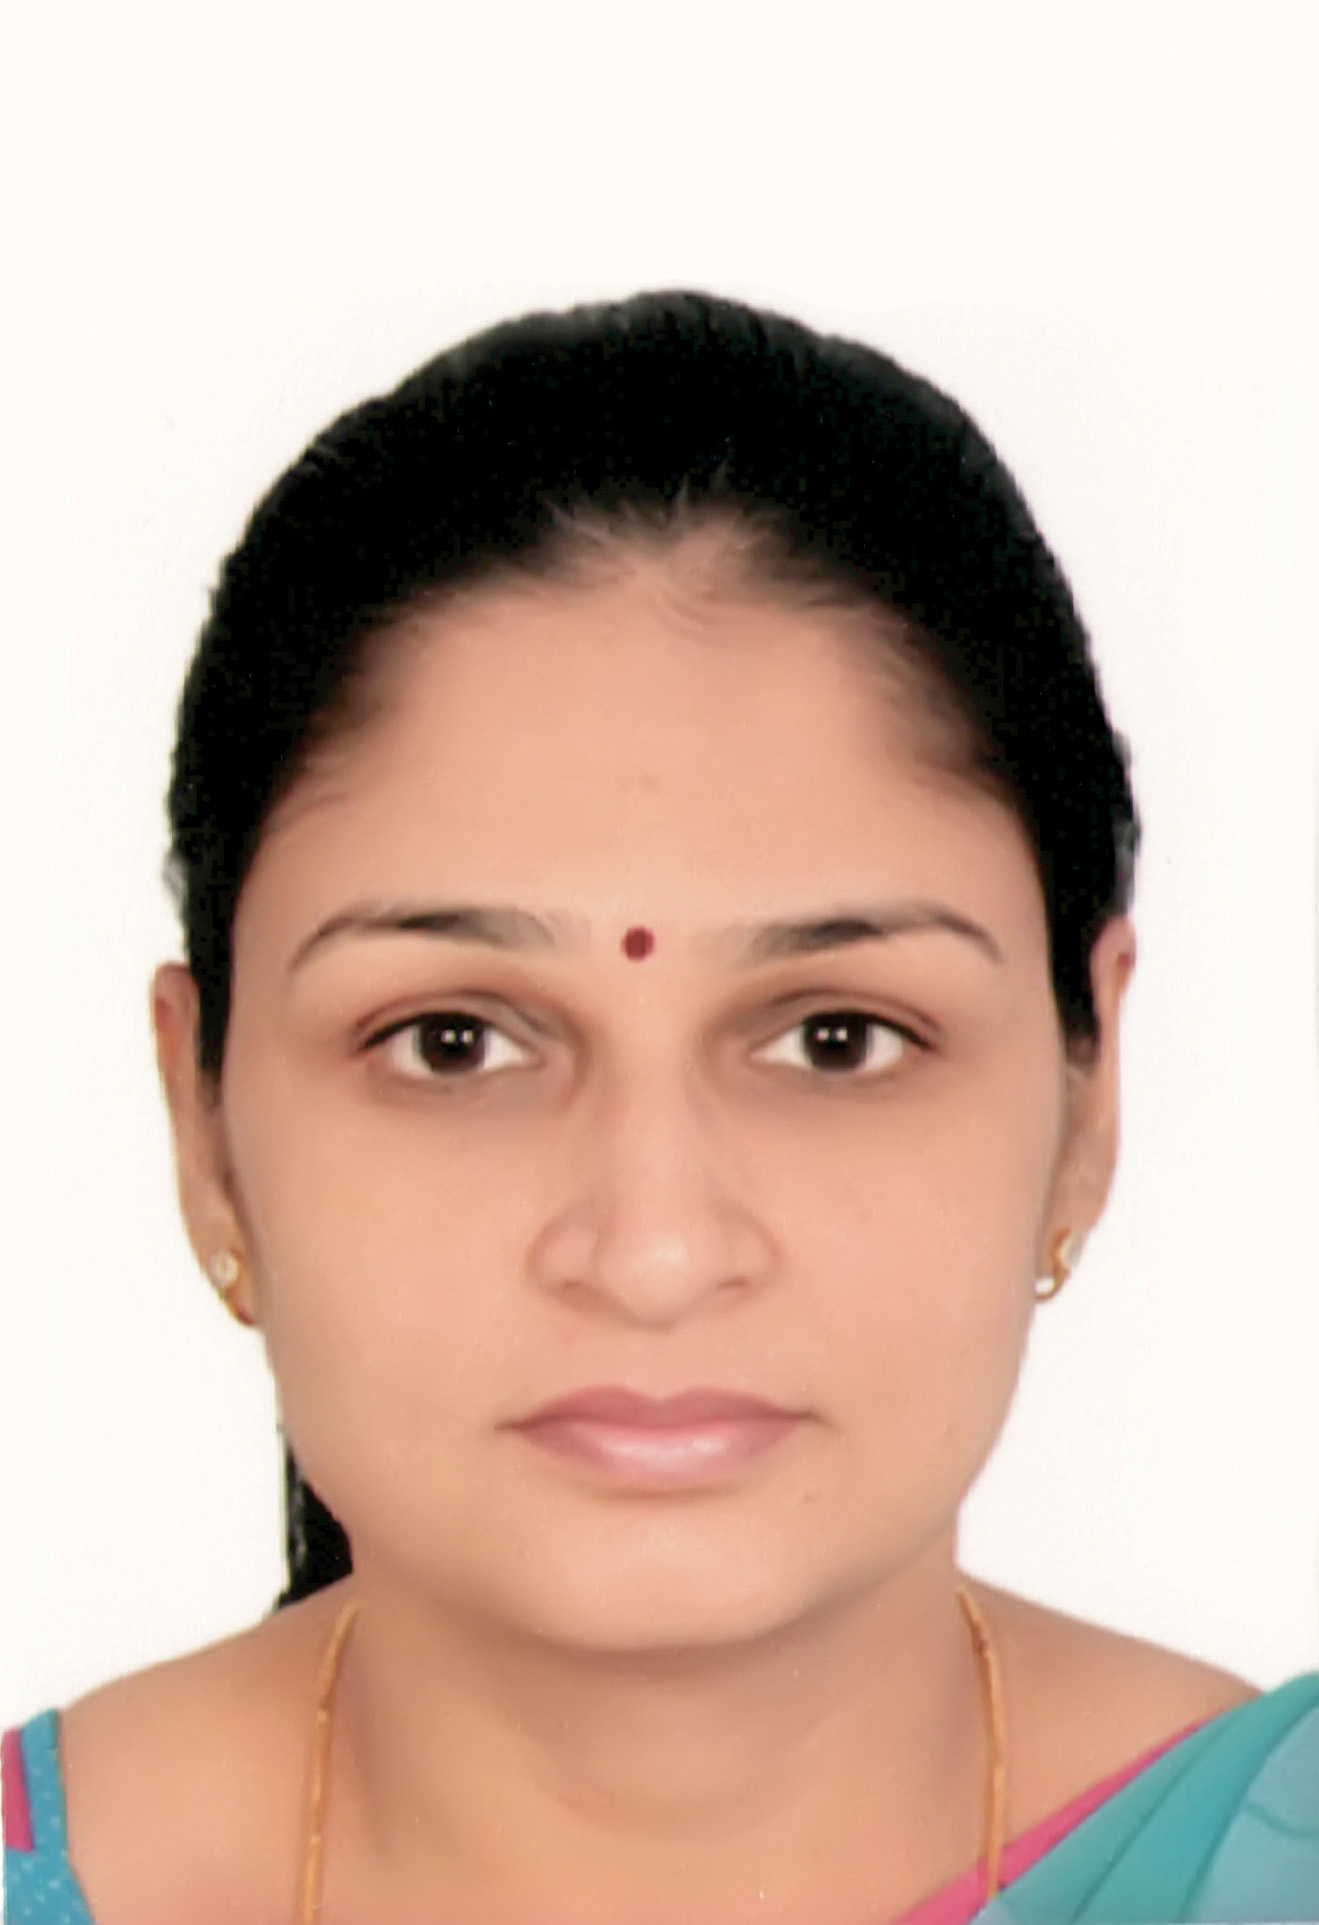 Dr. Mitul  Gupta from Airport Plaza, 14, Tonk Rd, Chandrakala Colony, Mata colony, Jaipur ,Jaipur, Rajasthan, 302016, India 9 years experience in Speciality Obstetrics &amp; Gynecology | Kayawell